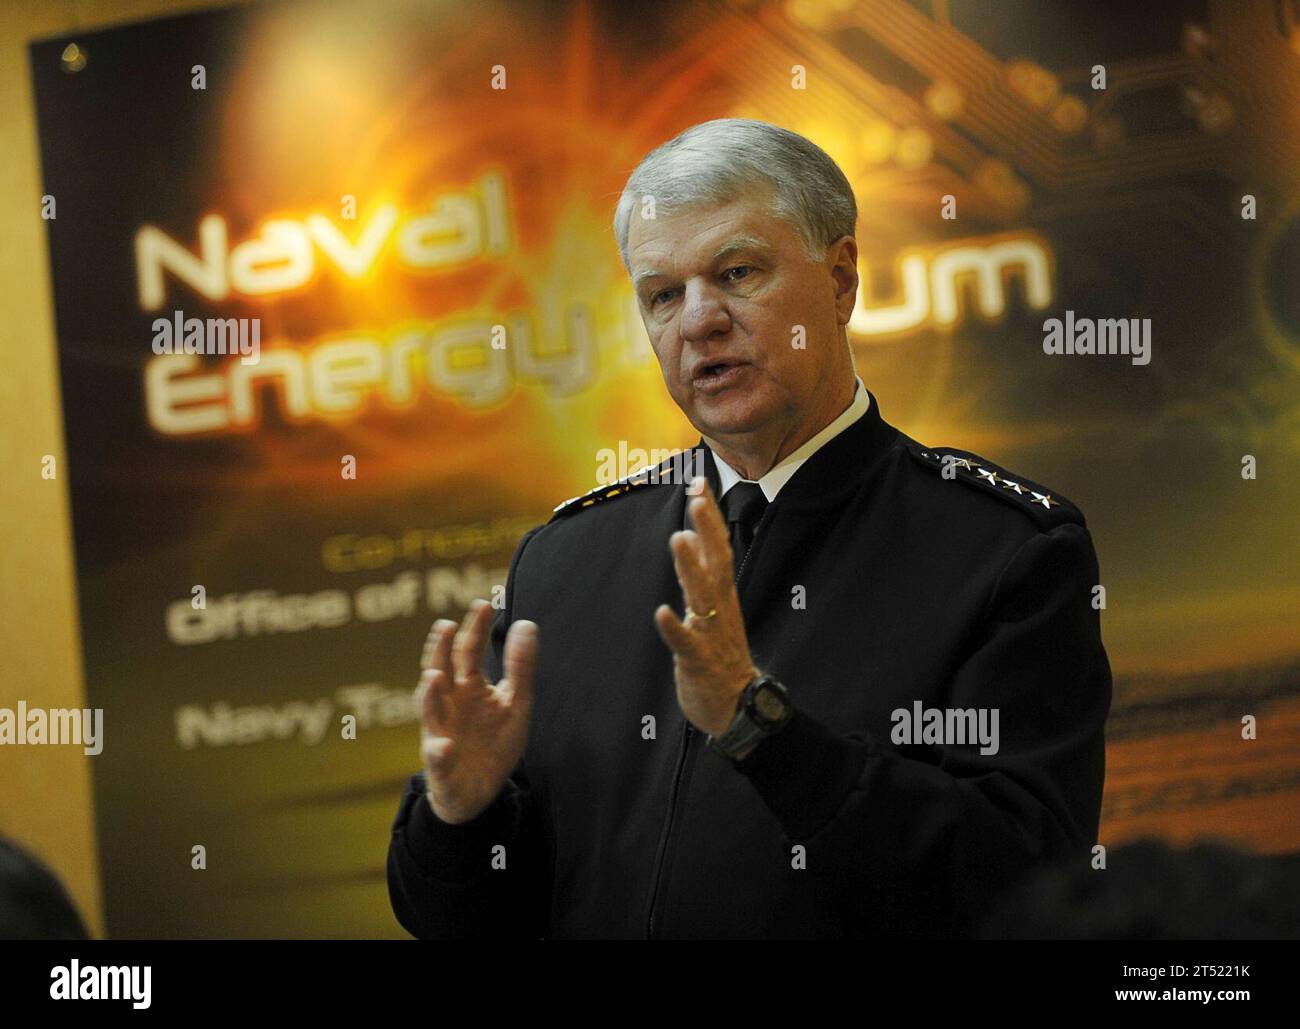 0910148273J-028 MCLEAN, Va. (Oct. 14, 2009) Chief of Naval Operations (CNO) Adm. Gary Roughead speaks during a press conference at the 2009 Naval Energy Forum. Navy Stock Photo